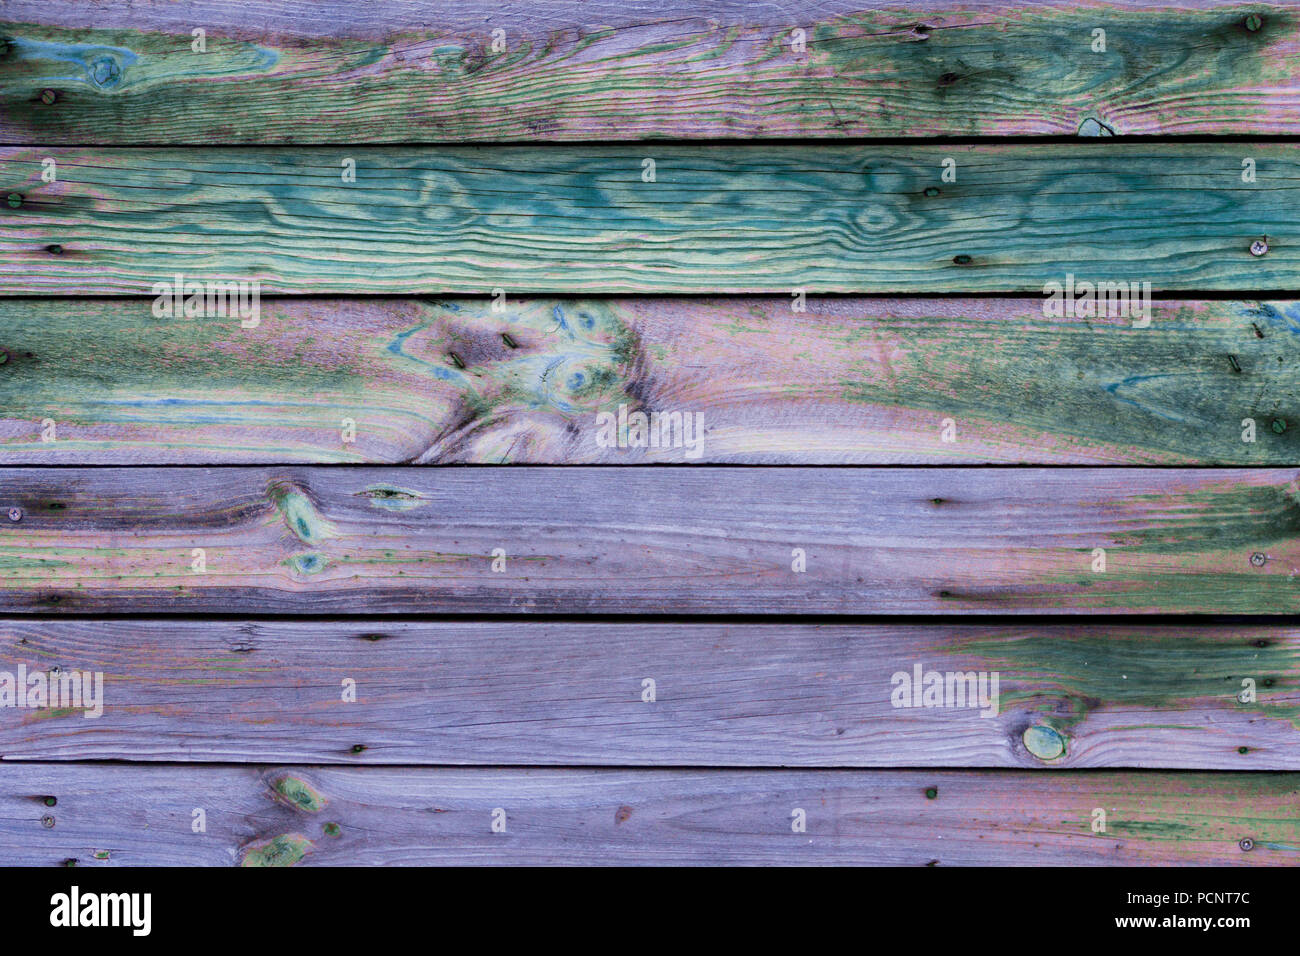 Close-up of the multicolor surface (wall, floor or overhead) made of wooden plank, panel or board in the purple, turquoise, blue, pink, green shades Stock Photo